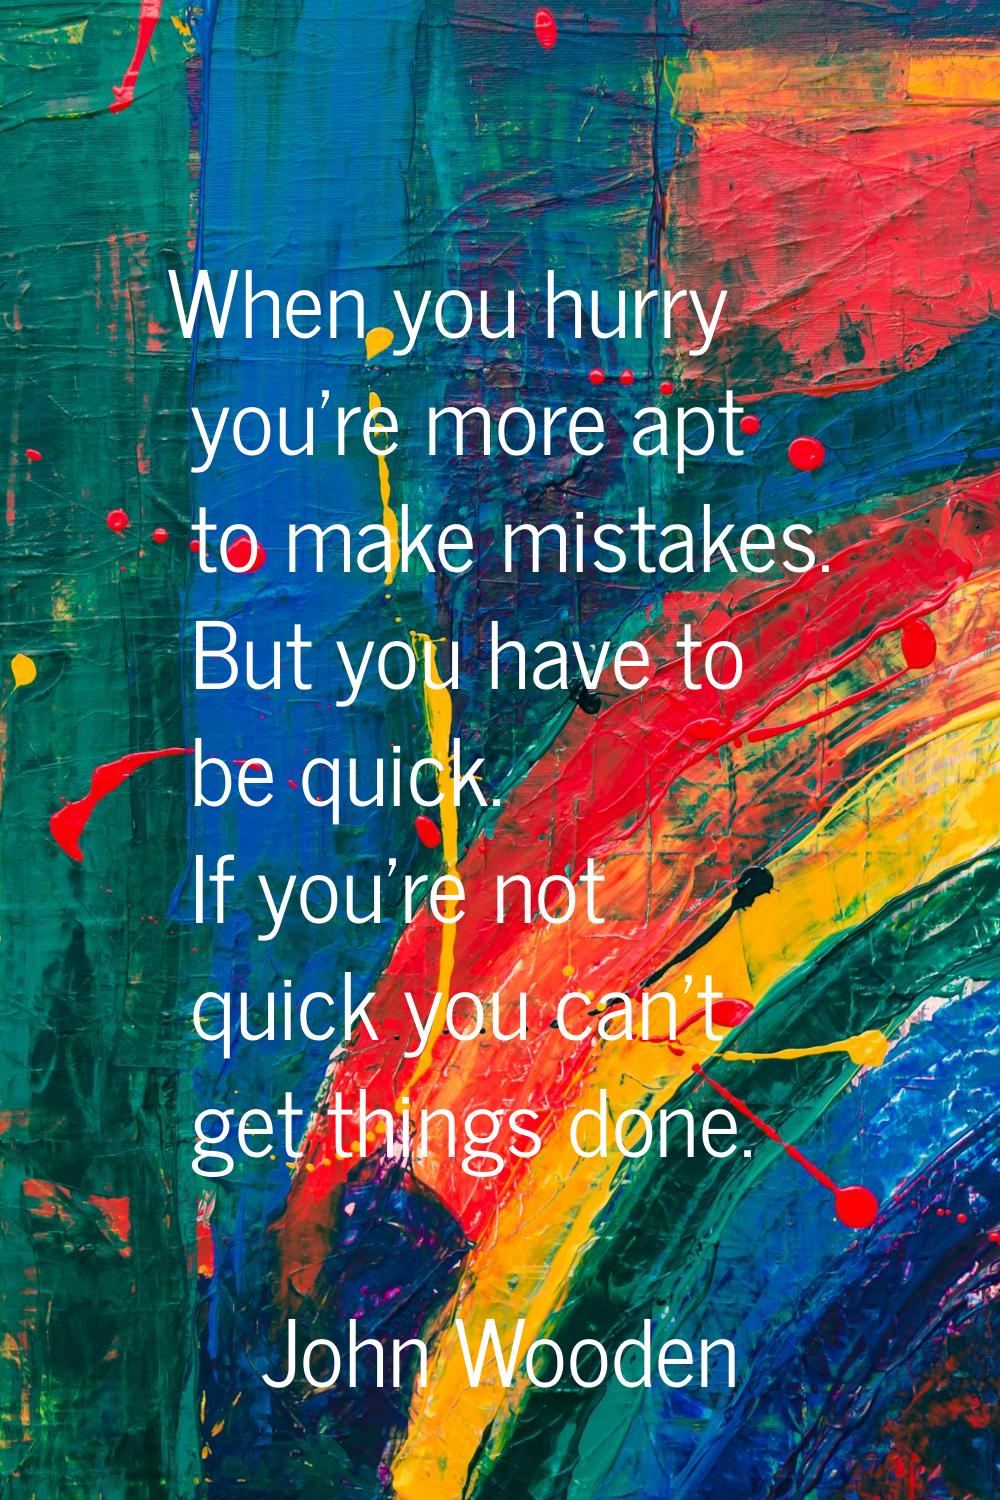 When you hurry you're more apt to make mistakes. But you have to be quick. If you're not quick you 